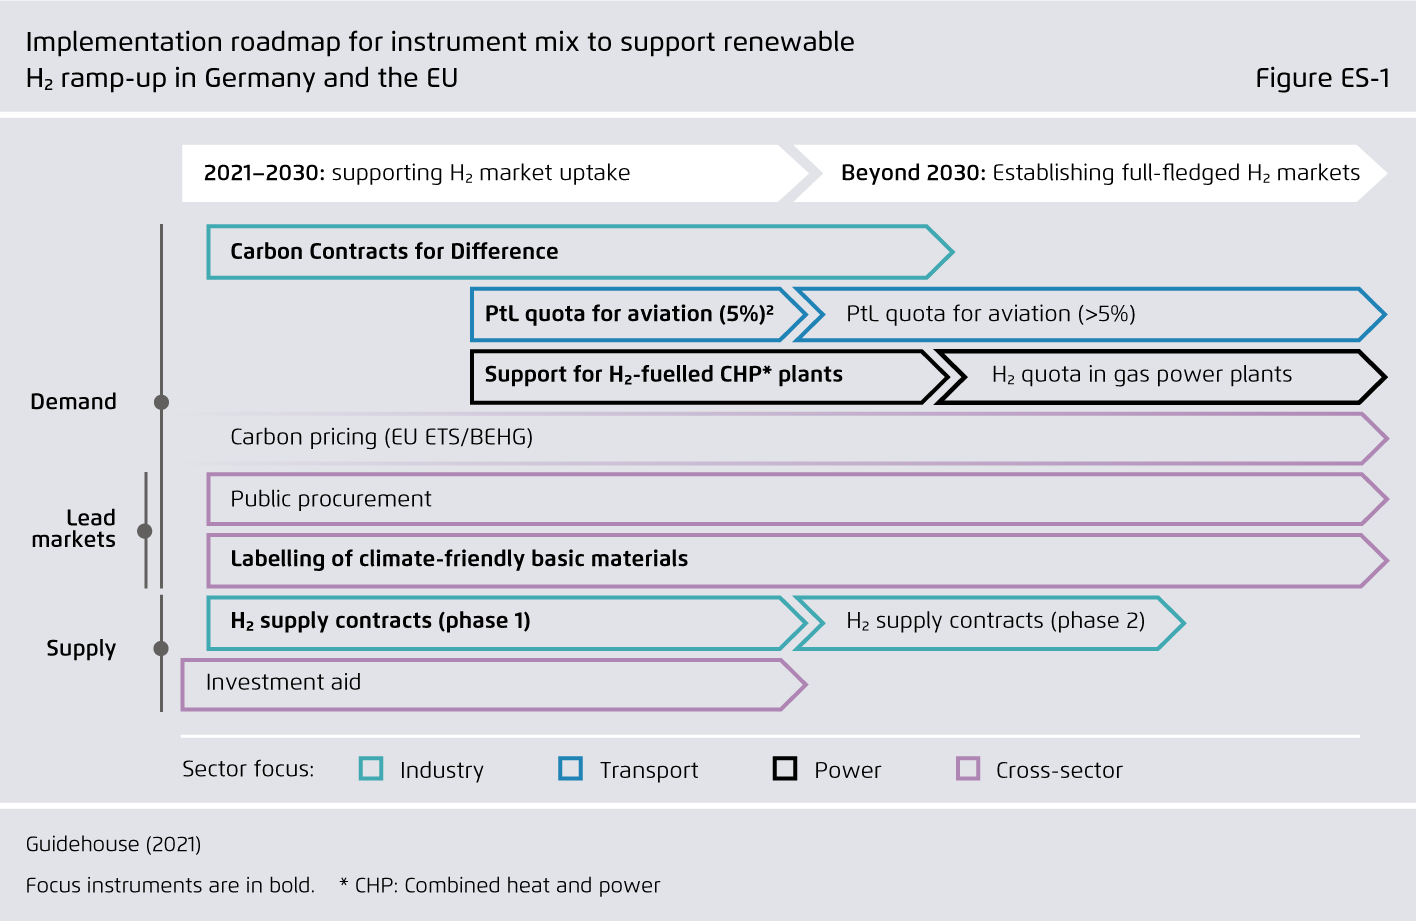 Preview for Implementation roadmap for instrument mix to support renewable H₂ ramp-up in Germany and the EU